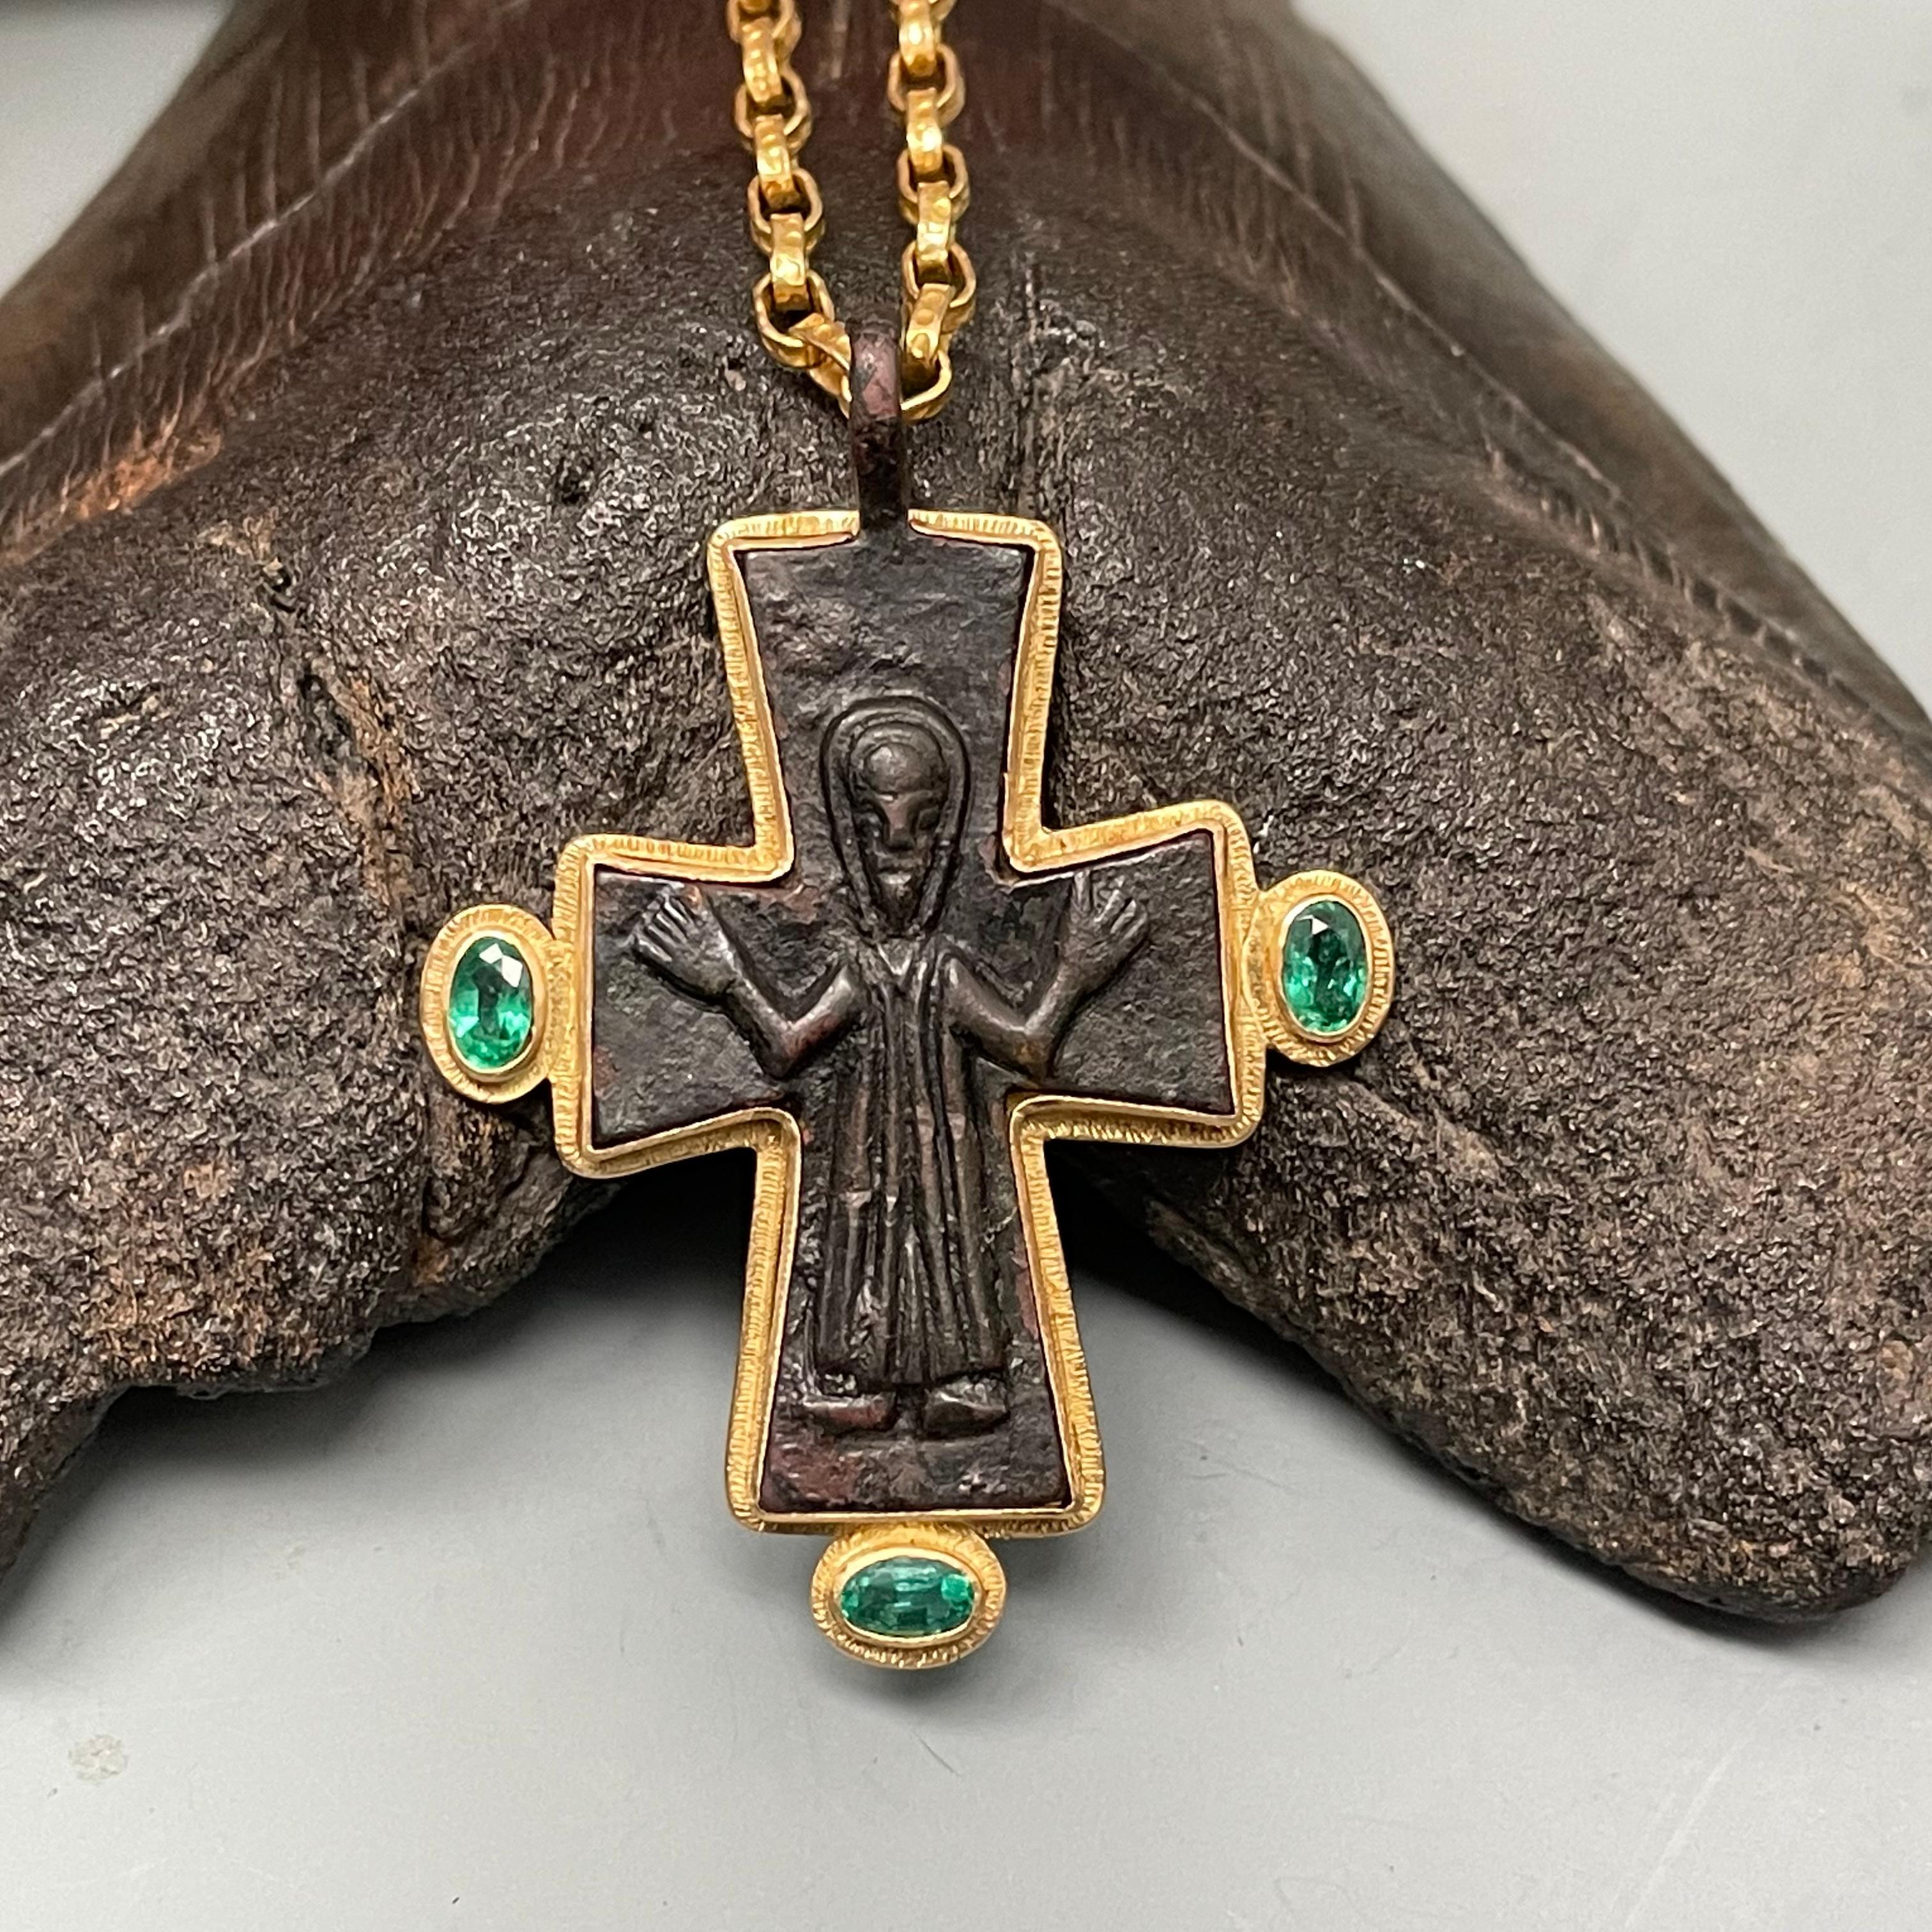 An authentic 8th to 11th century reliquary bronze cross from the Byzantine Empire, featuring Christ with arms out-stretched, has been ornamented with a Steven Battelle designed surrounding 18K gold line textured bezel and three 3 x 5 mm faceted